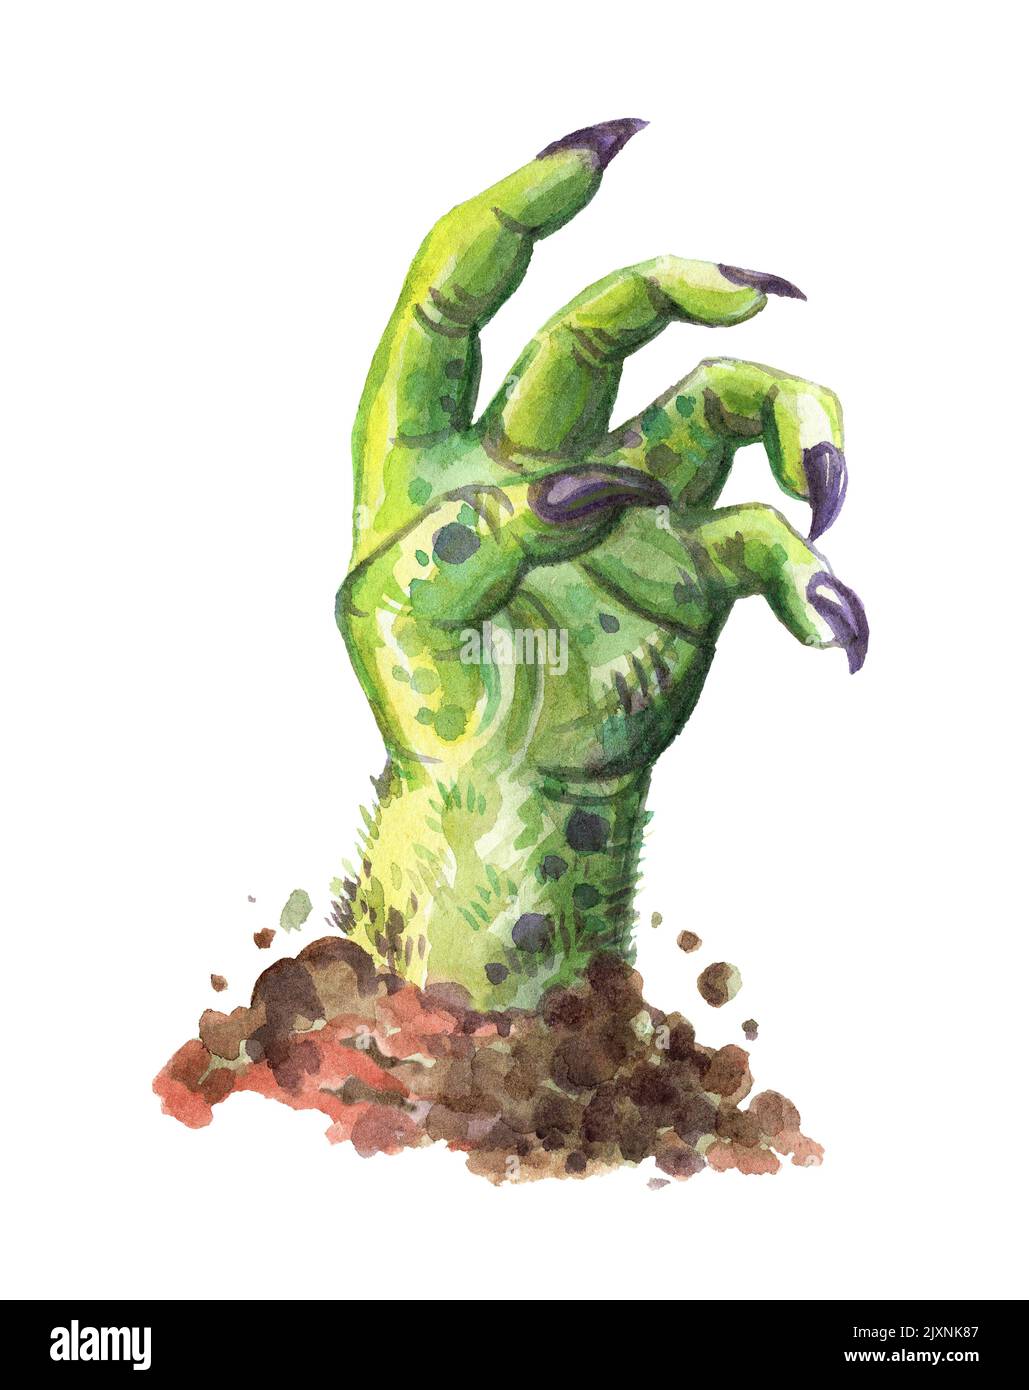 Watercolor illustration of scary Halloween zombie hand out of the ground. Halloween illustration. Watercolor painting. For halloween party, posters, d Stock Photo